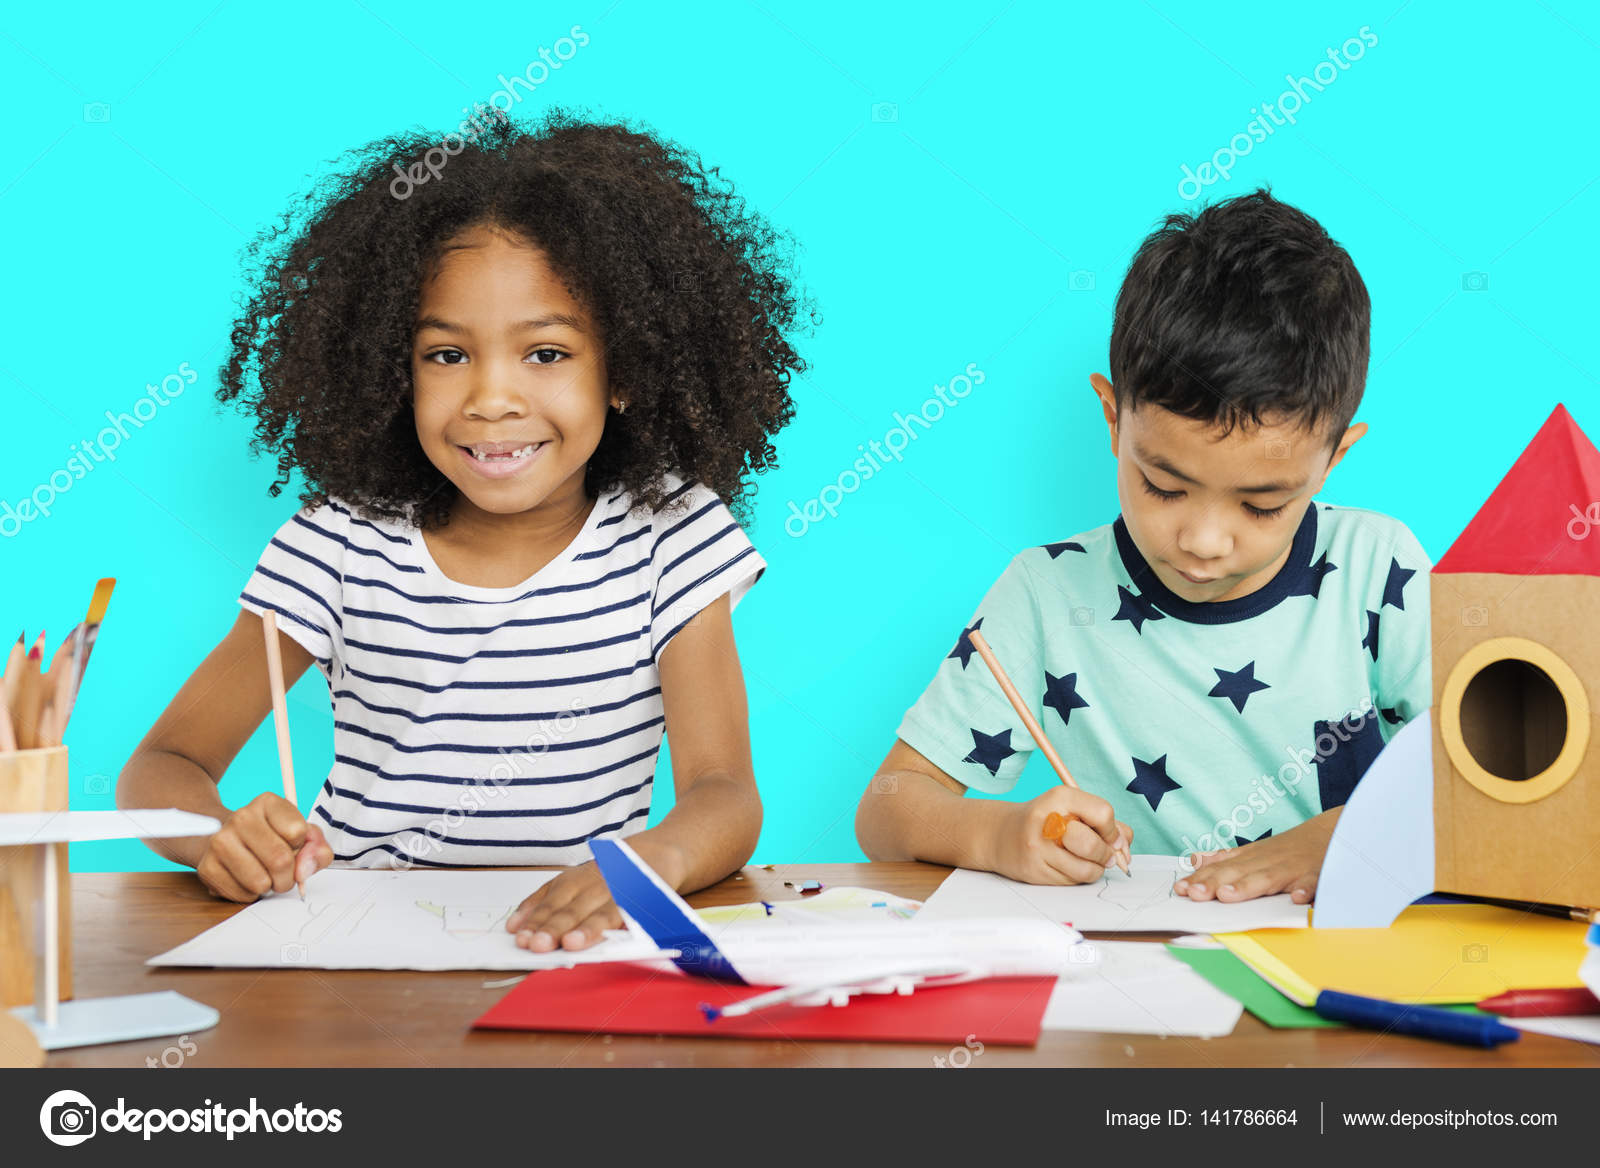 Children`s Drawing Pencils. Stock Image - Image of drawing, little: 81852871